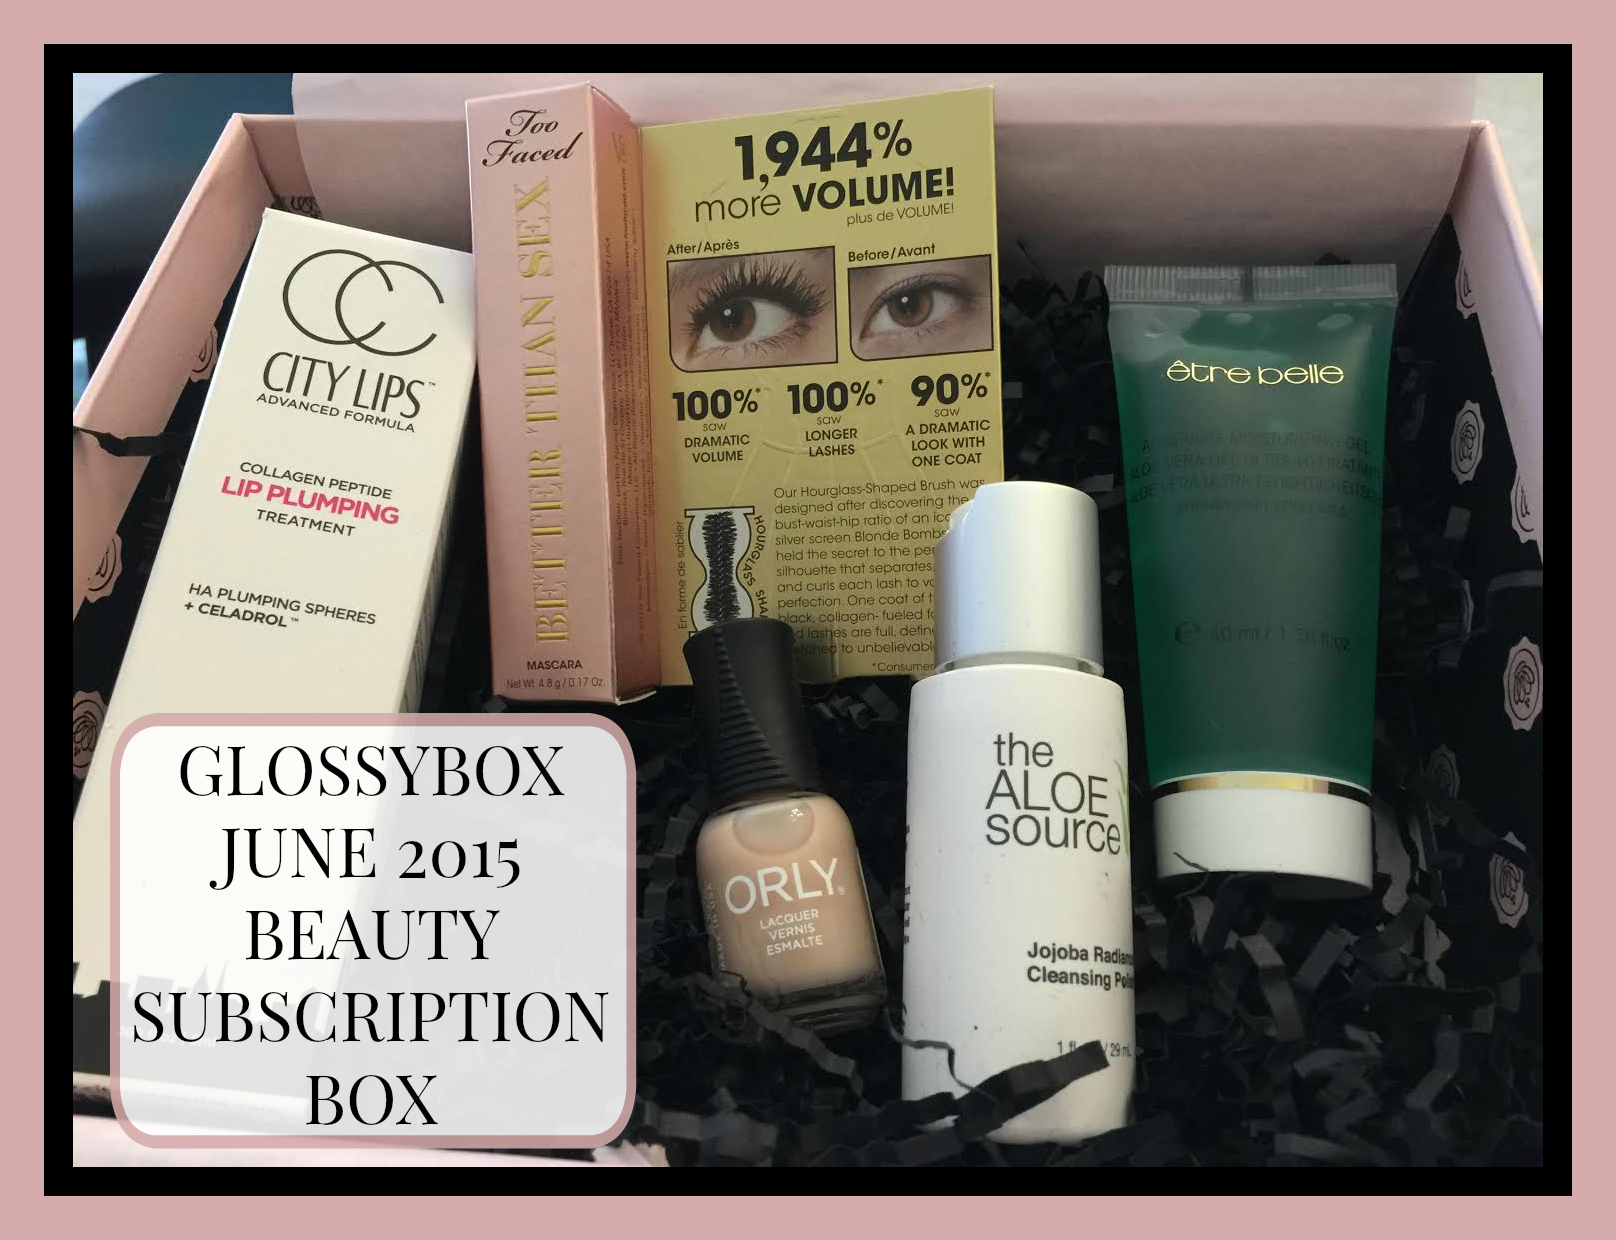 #Glossybox #Makeup #Beauty #BBloggers #Pampering #ad